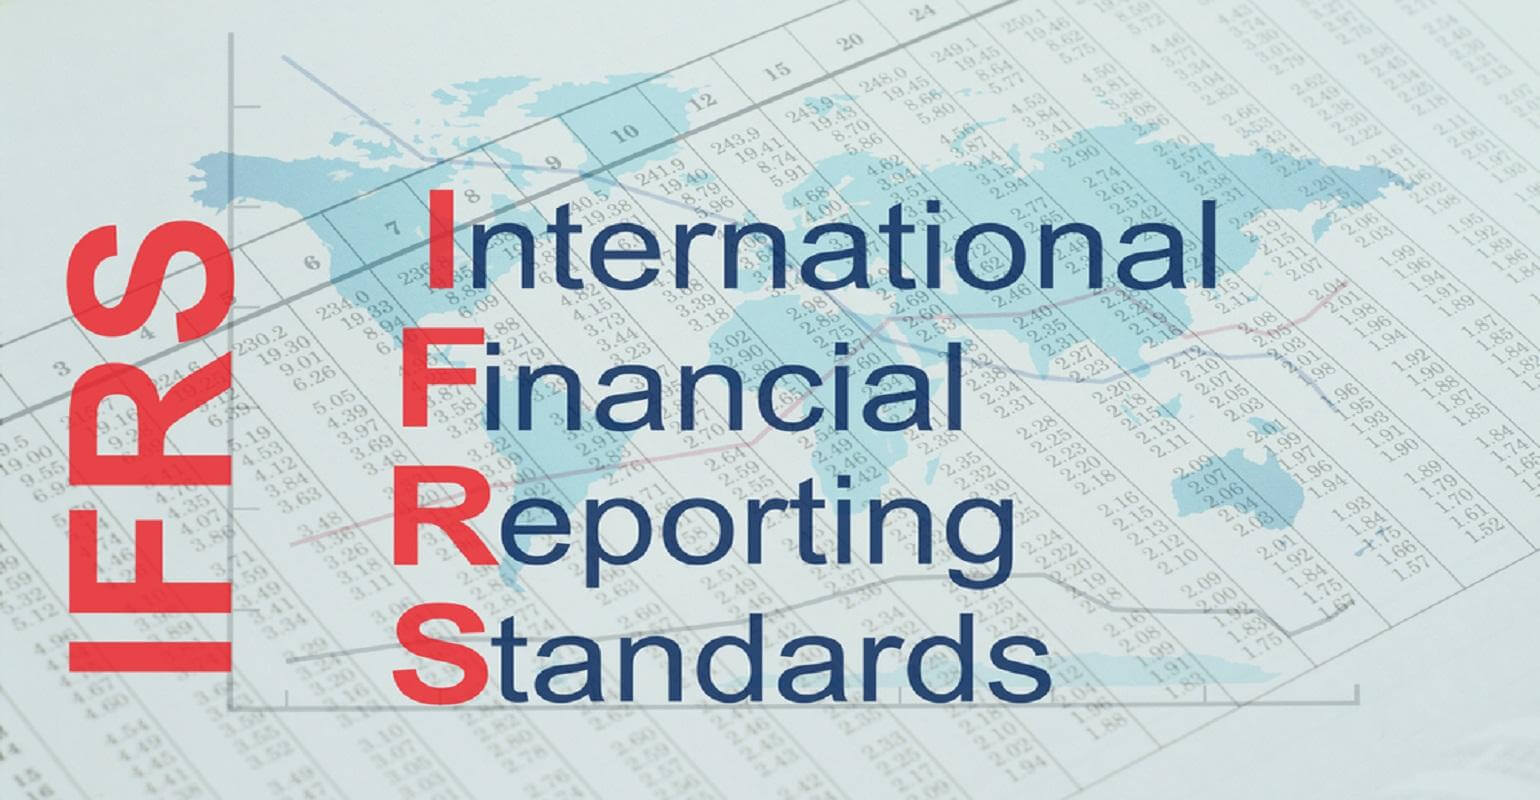 Advanced International Financial Reporting Standards (IFRS)